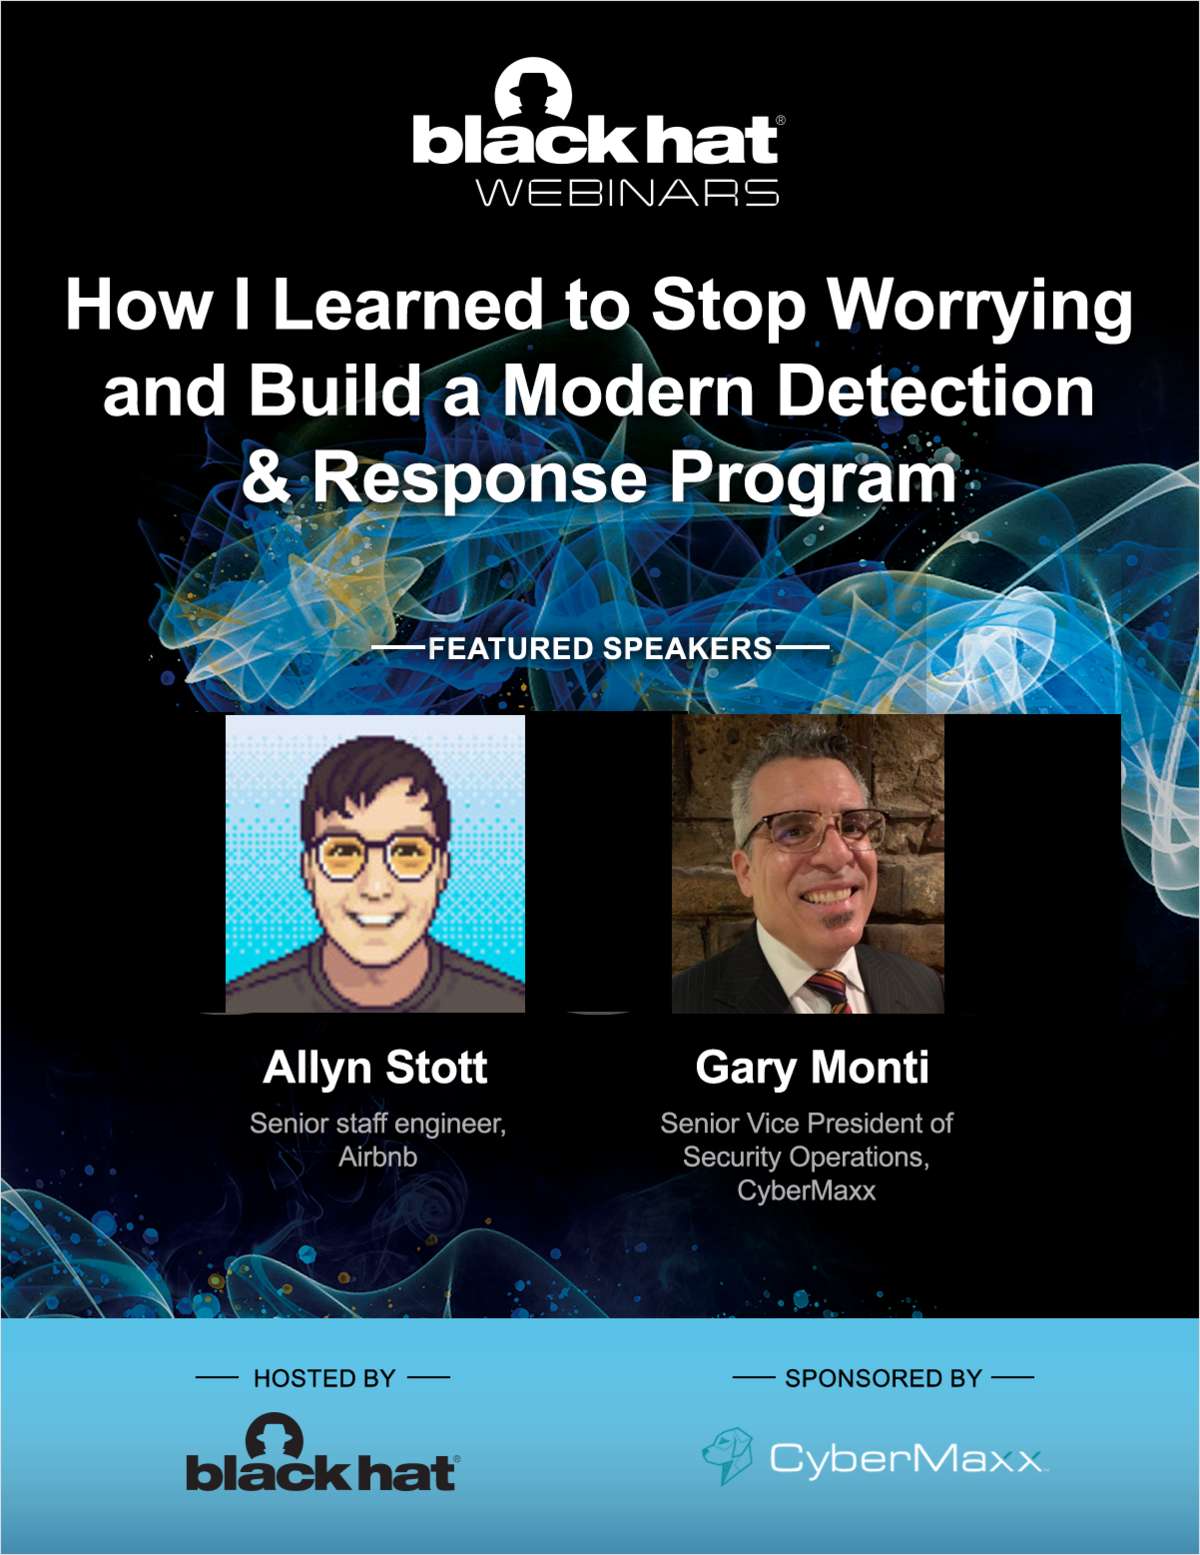 How I Learned to Stop Worrying and Build a Modern Detection & Response Program